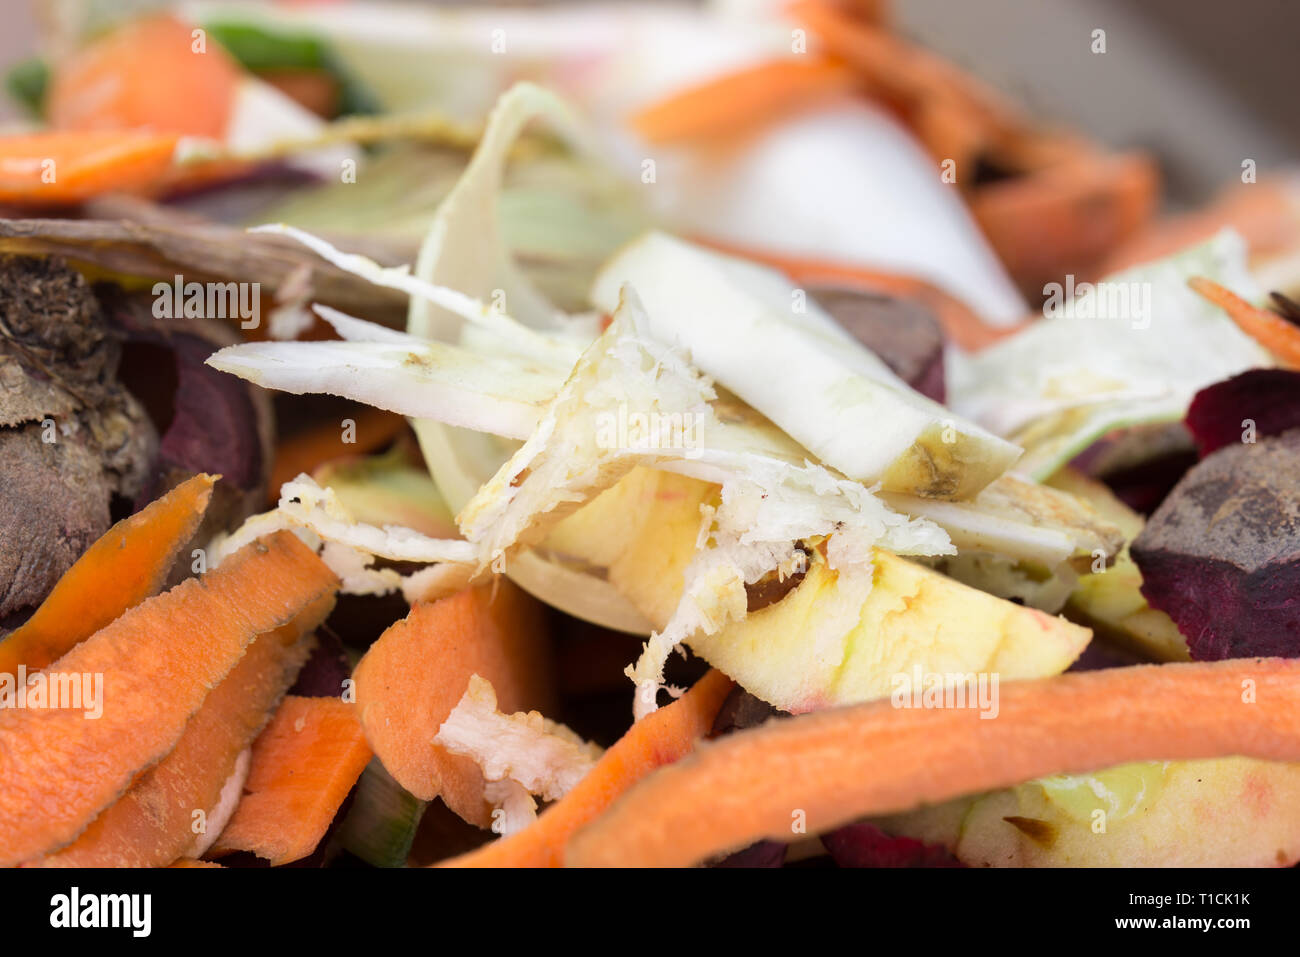 rotting kitchen vegetable scraps for composting Stock Photo